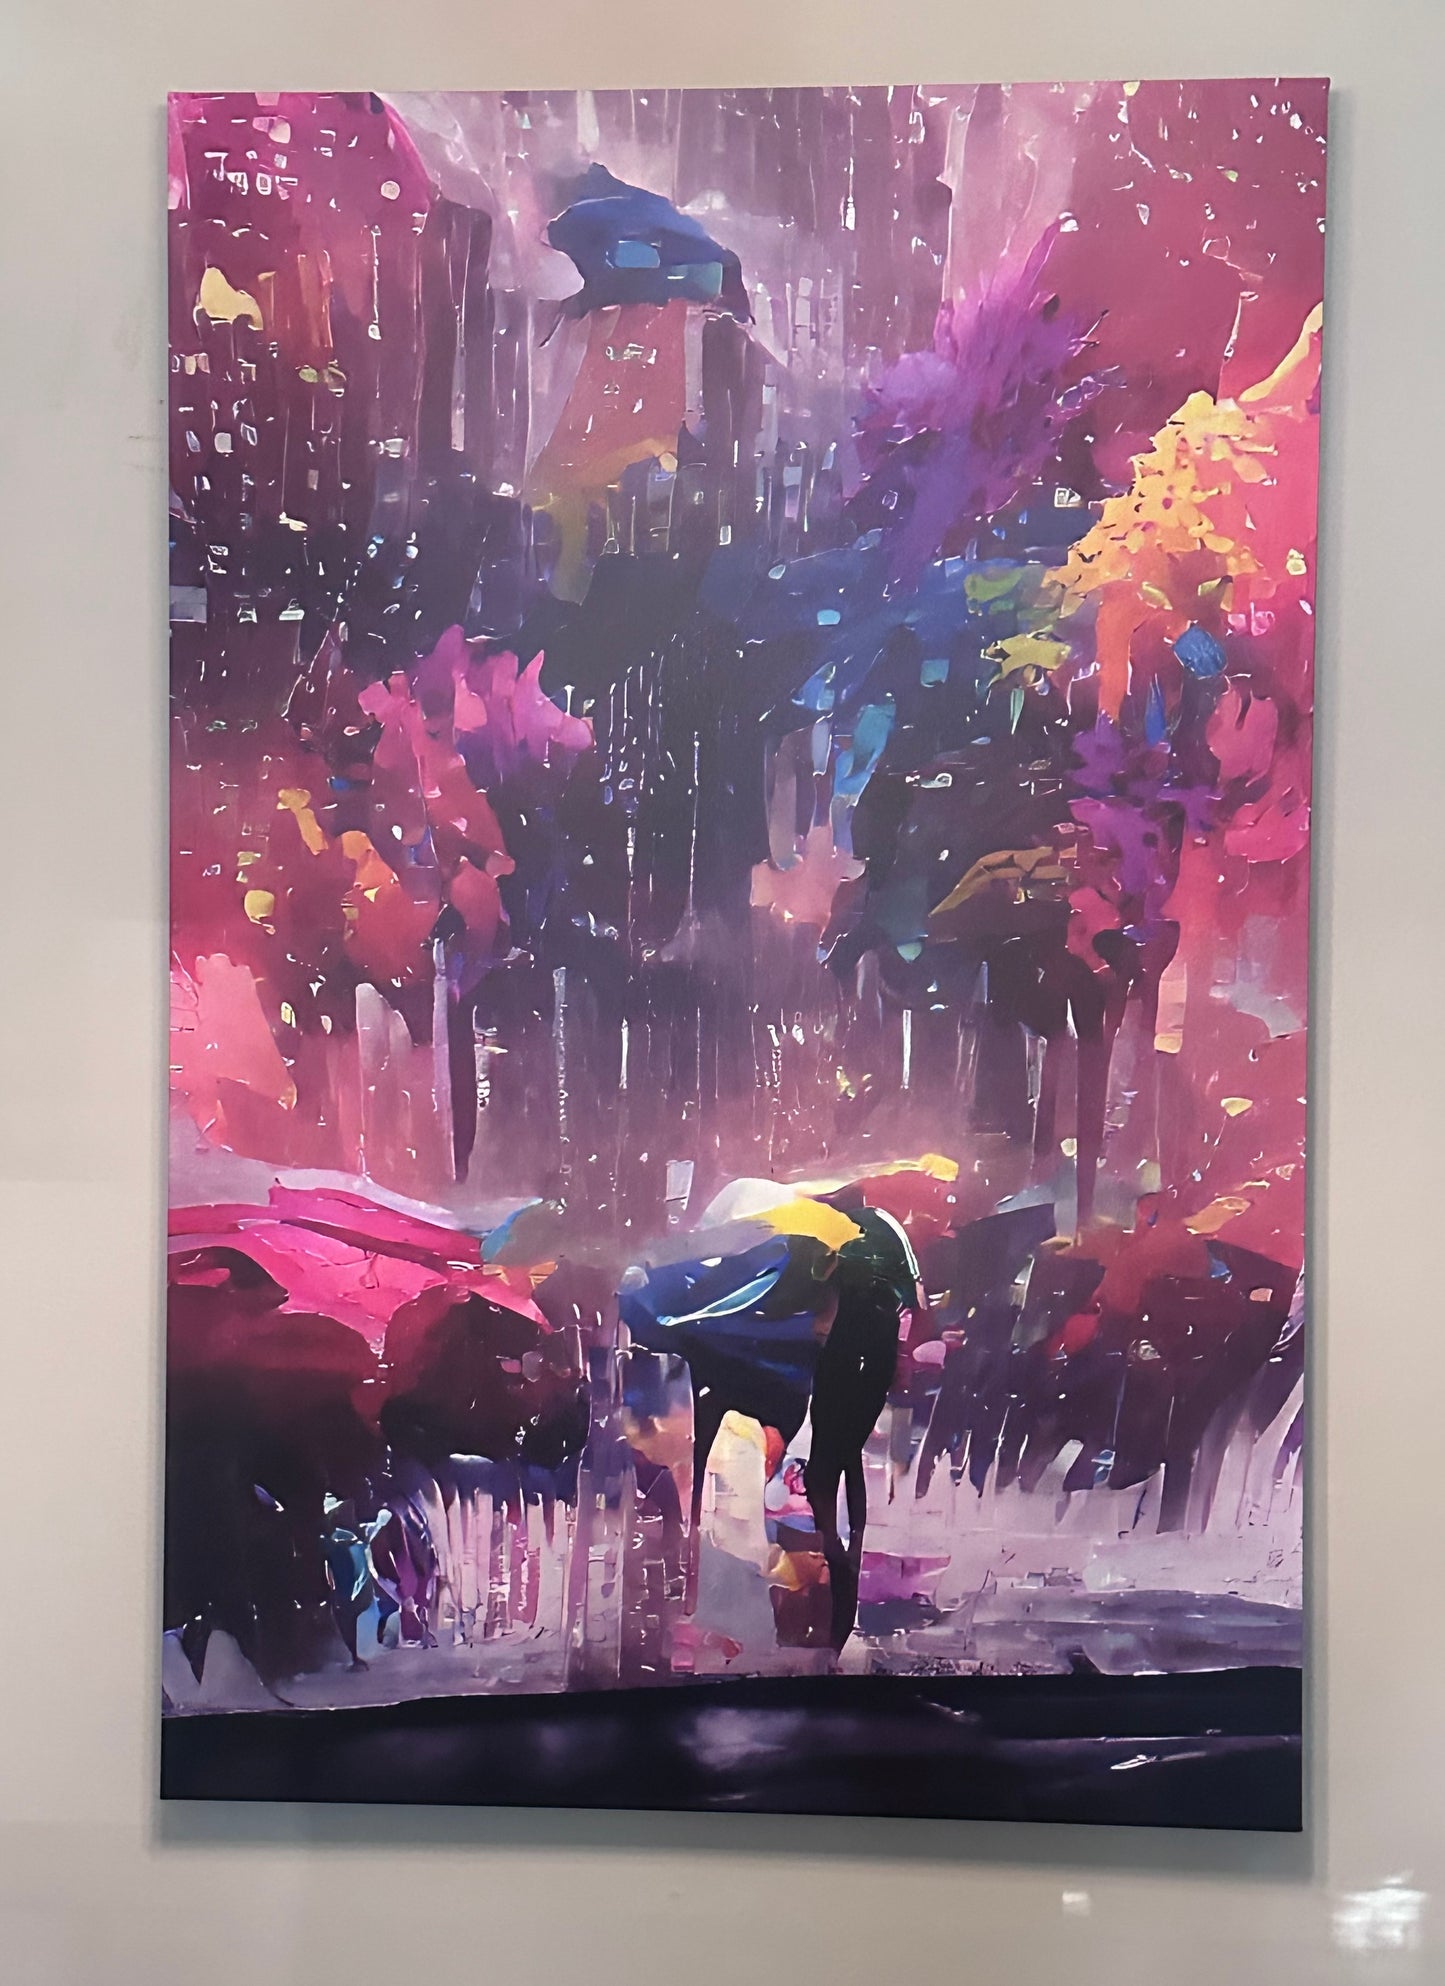 Dancing in the Rain Canvas - Impressionistic painting - Fine Art print ready to frame, Gallery Wrapped Canvas - multiple size options.